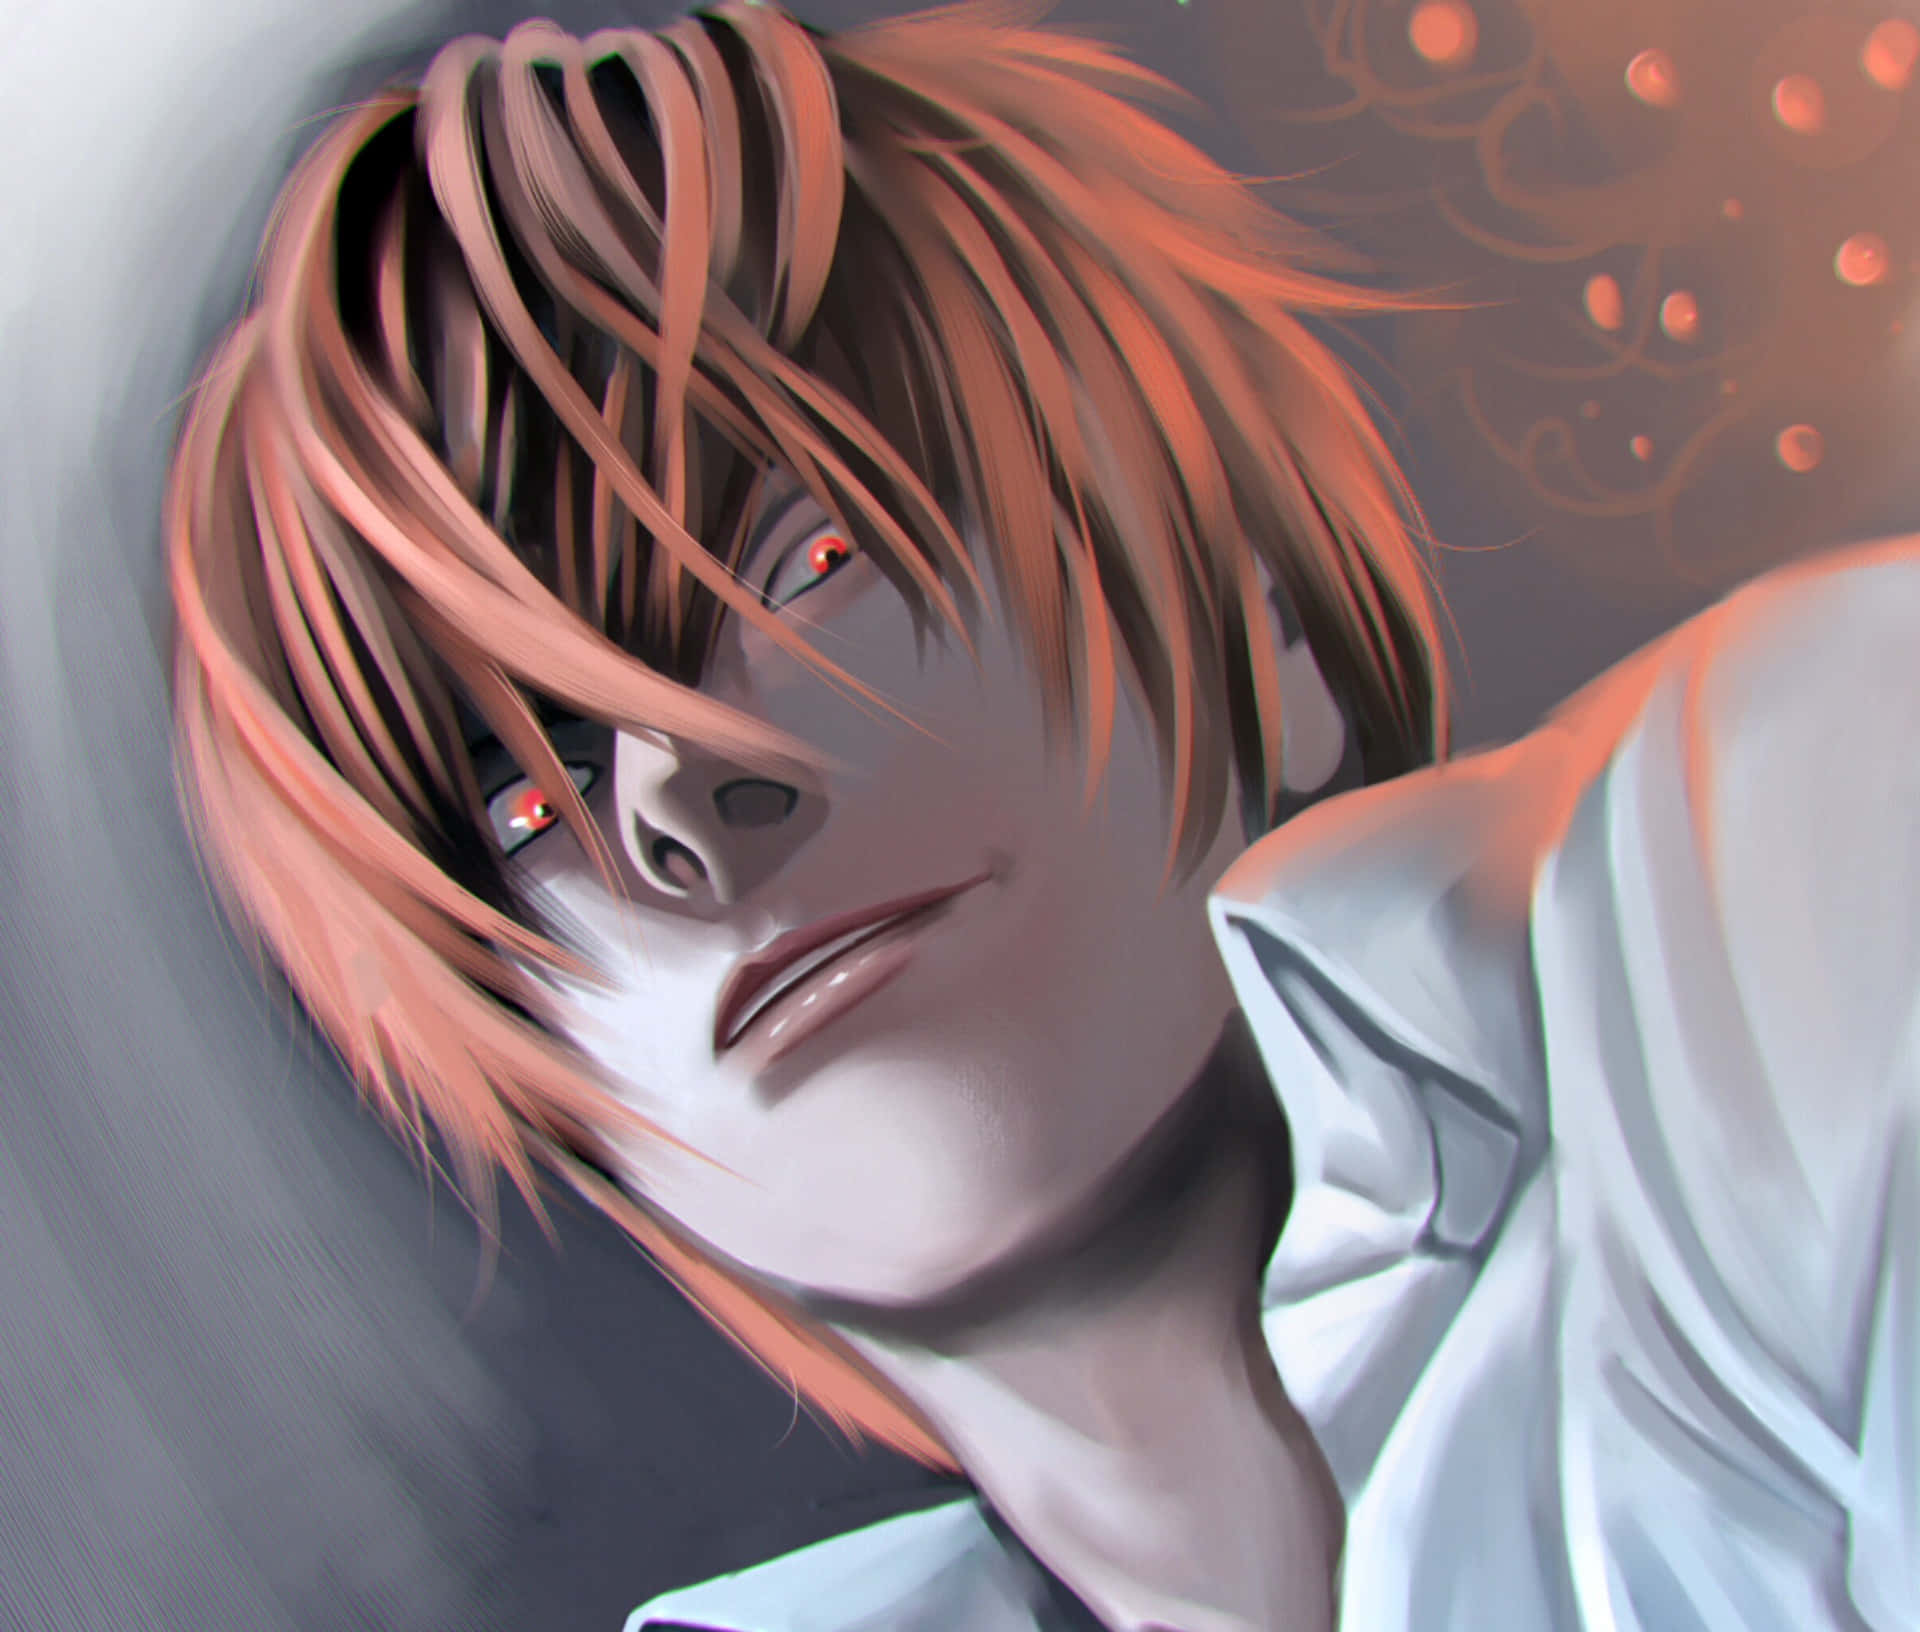 Light Yagami's justice-seeking mission in the Death Note series